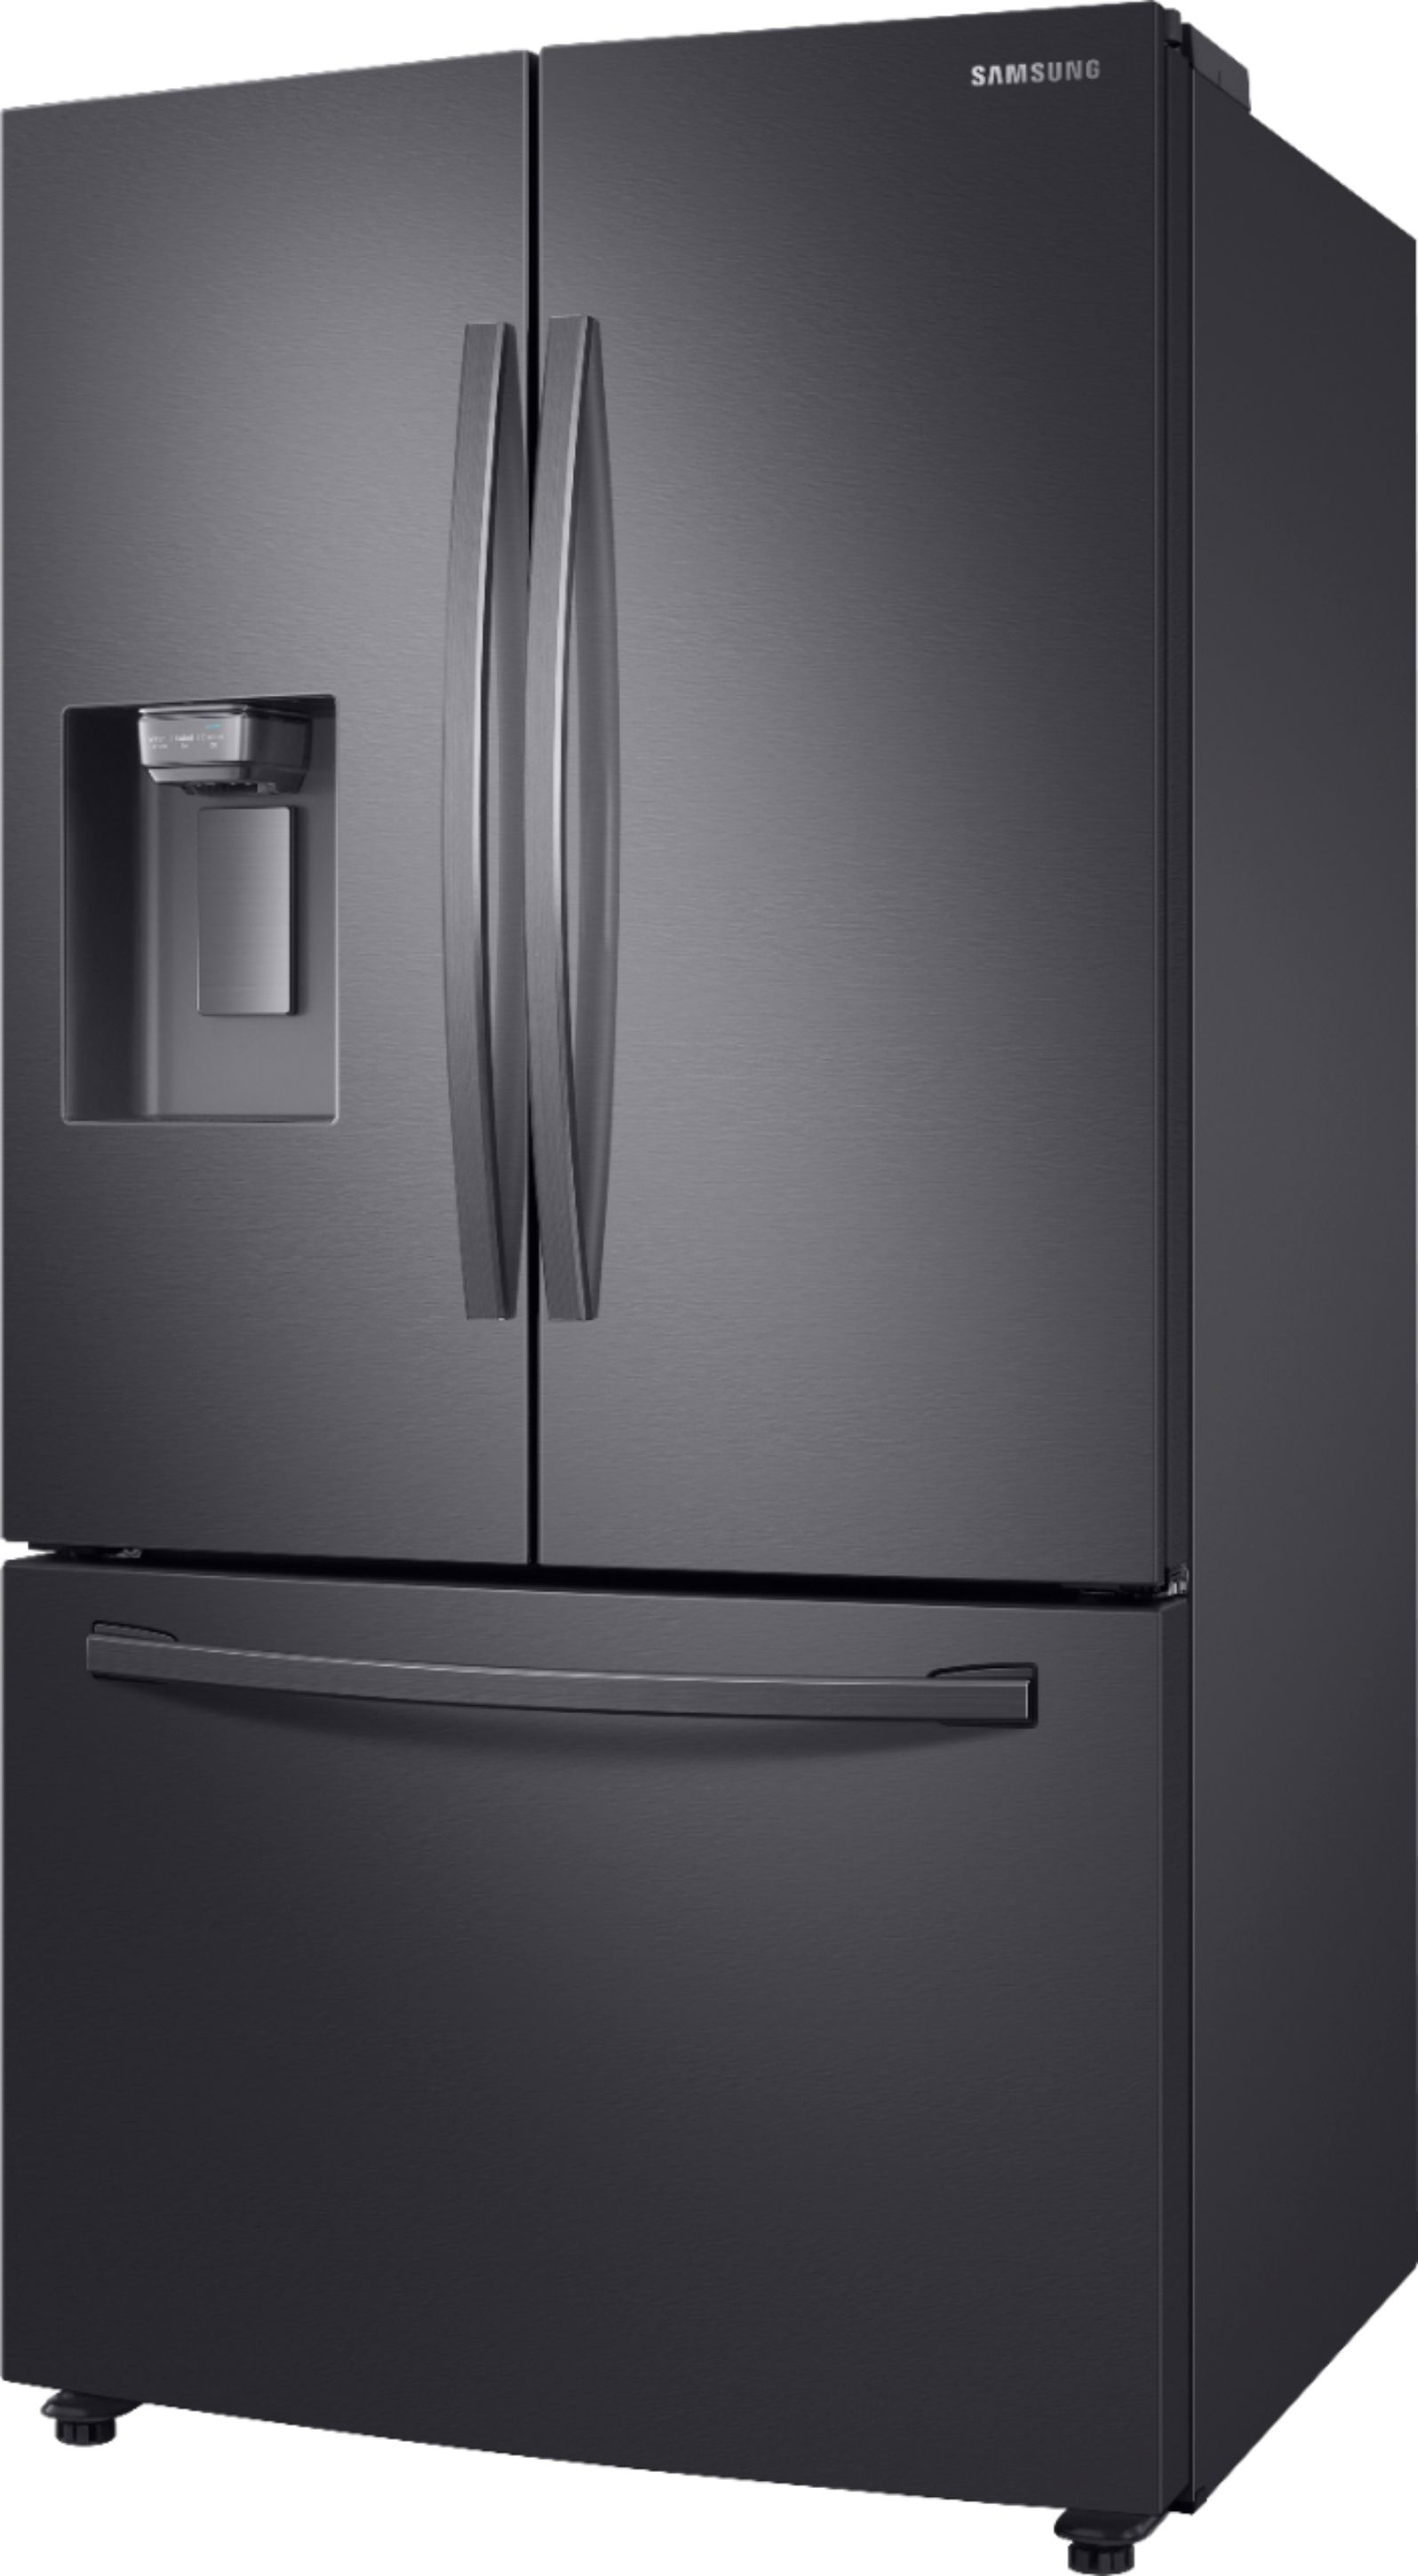 Left View: Samsung - 28 Cu. Ft. French Door Fingerprint Resistant Refrigerator with CoolSelect Pantry - Black stainless steel